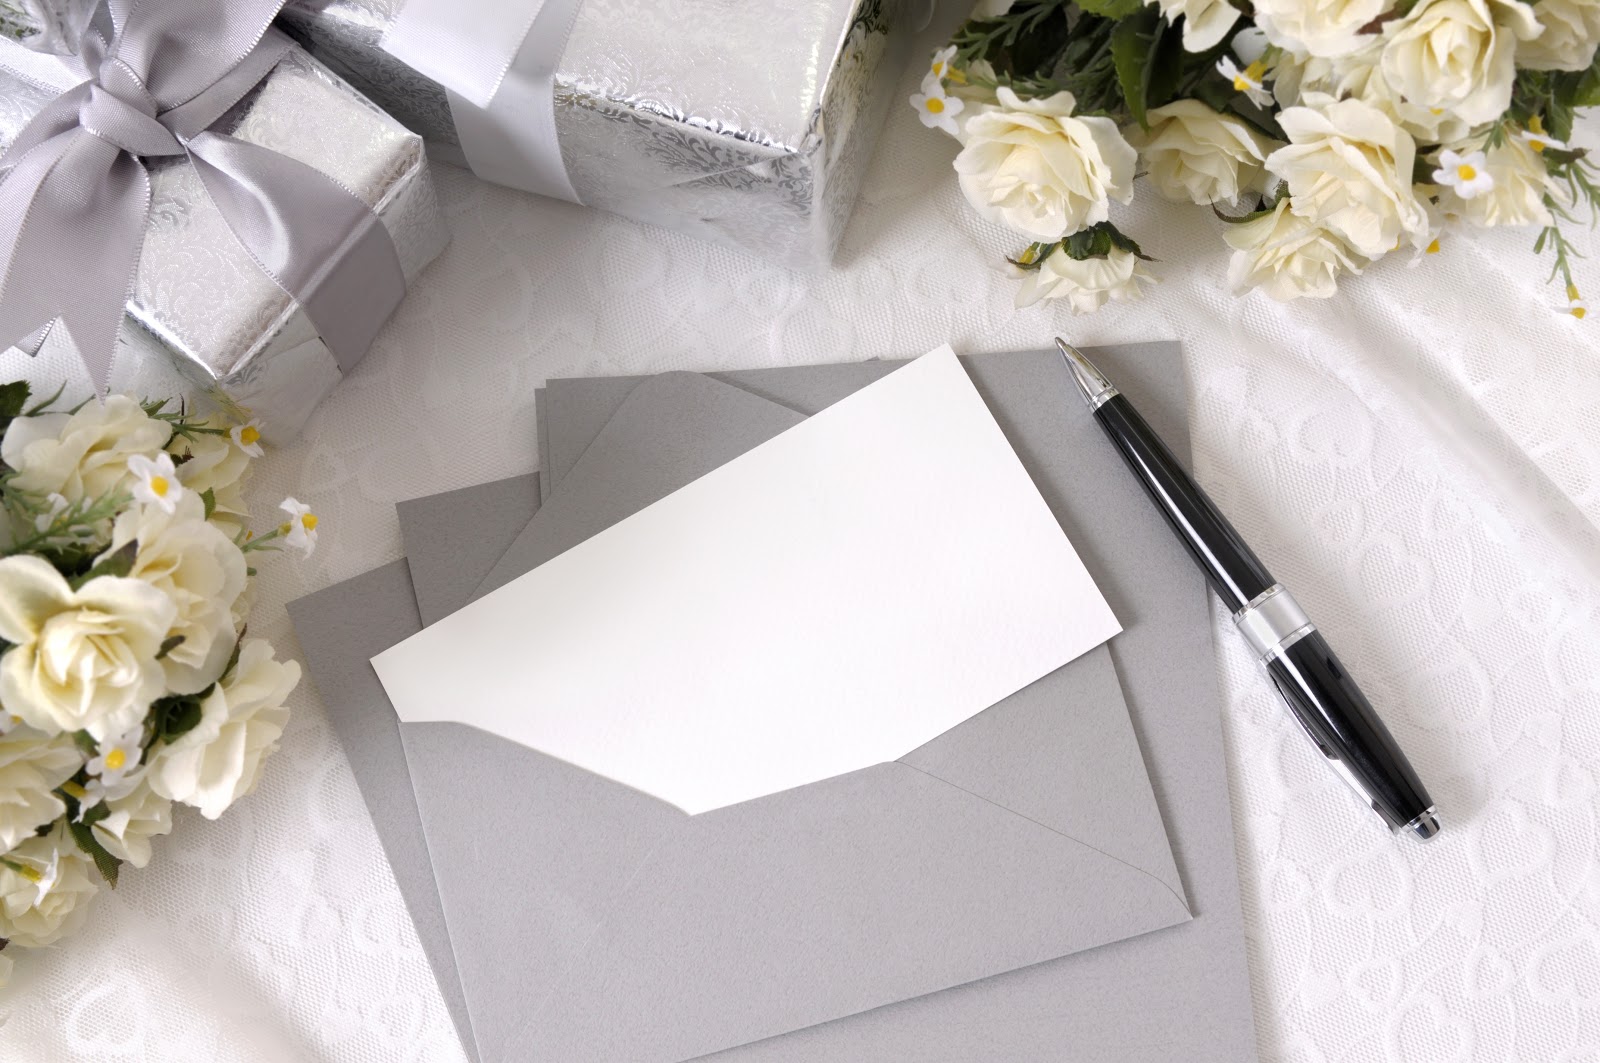 Wedding wishes: Wedding gifts, flowers, and a blank note and pen next to an envelope